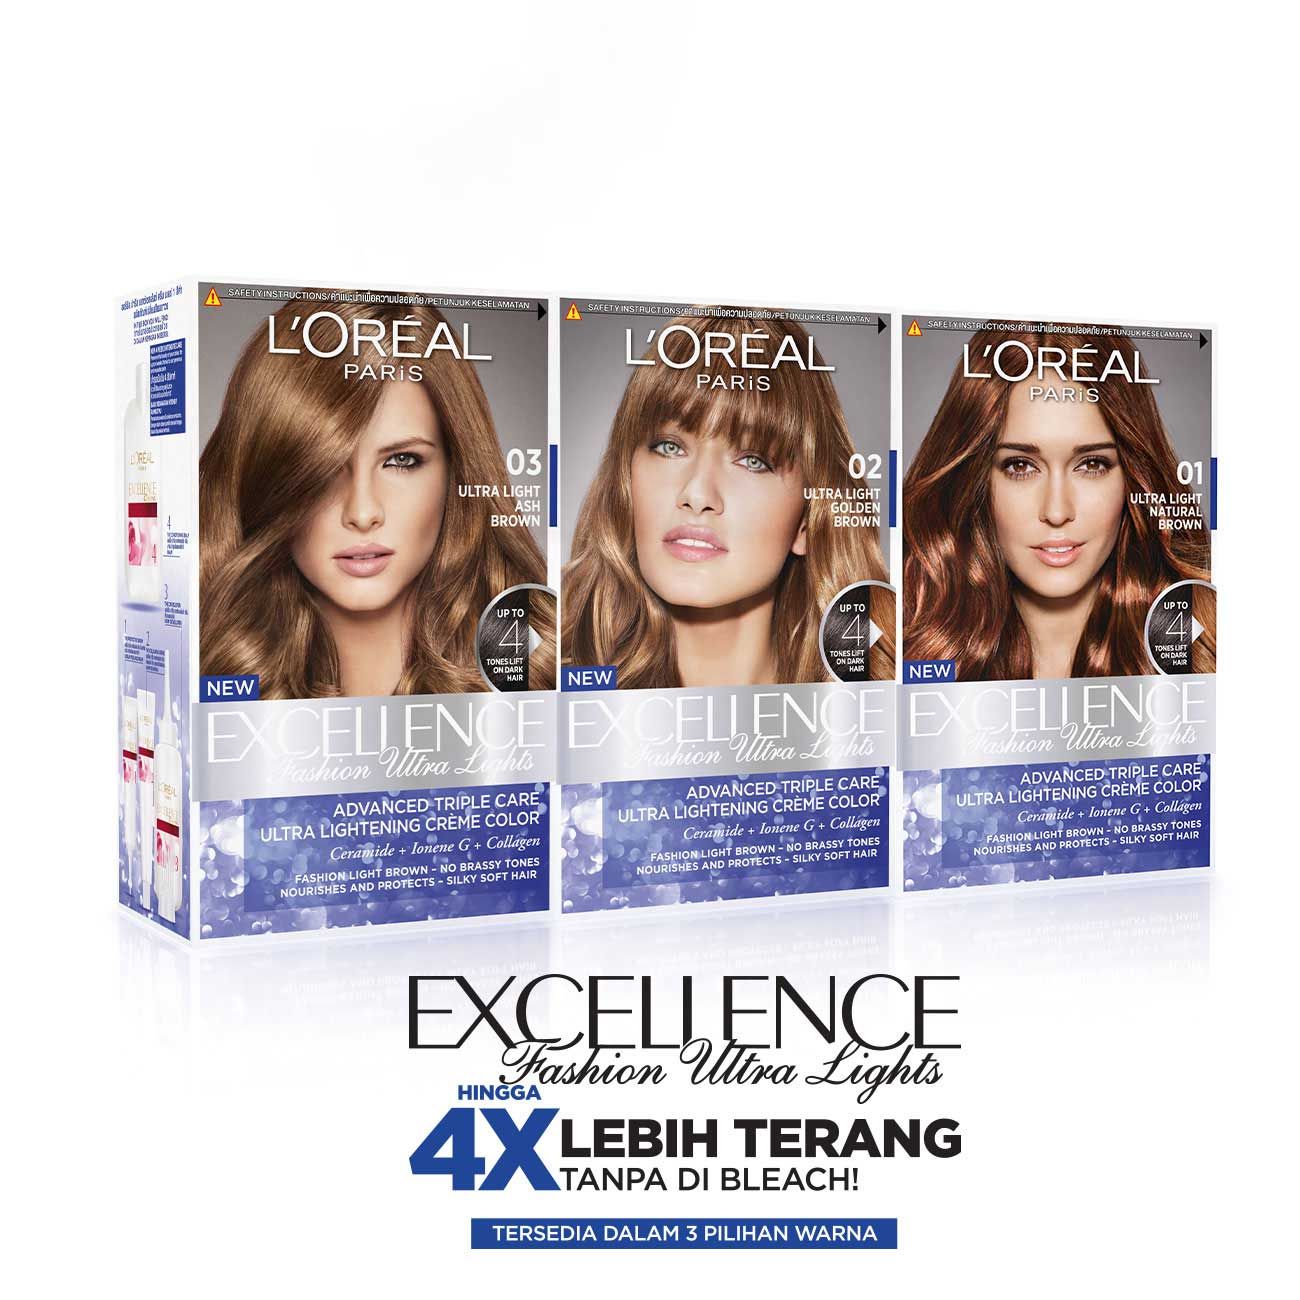 L'Oreal Paris Excellence Fashion Ultra Lights 01 Nat Brown - 3